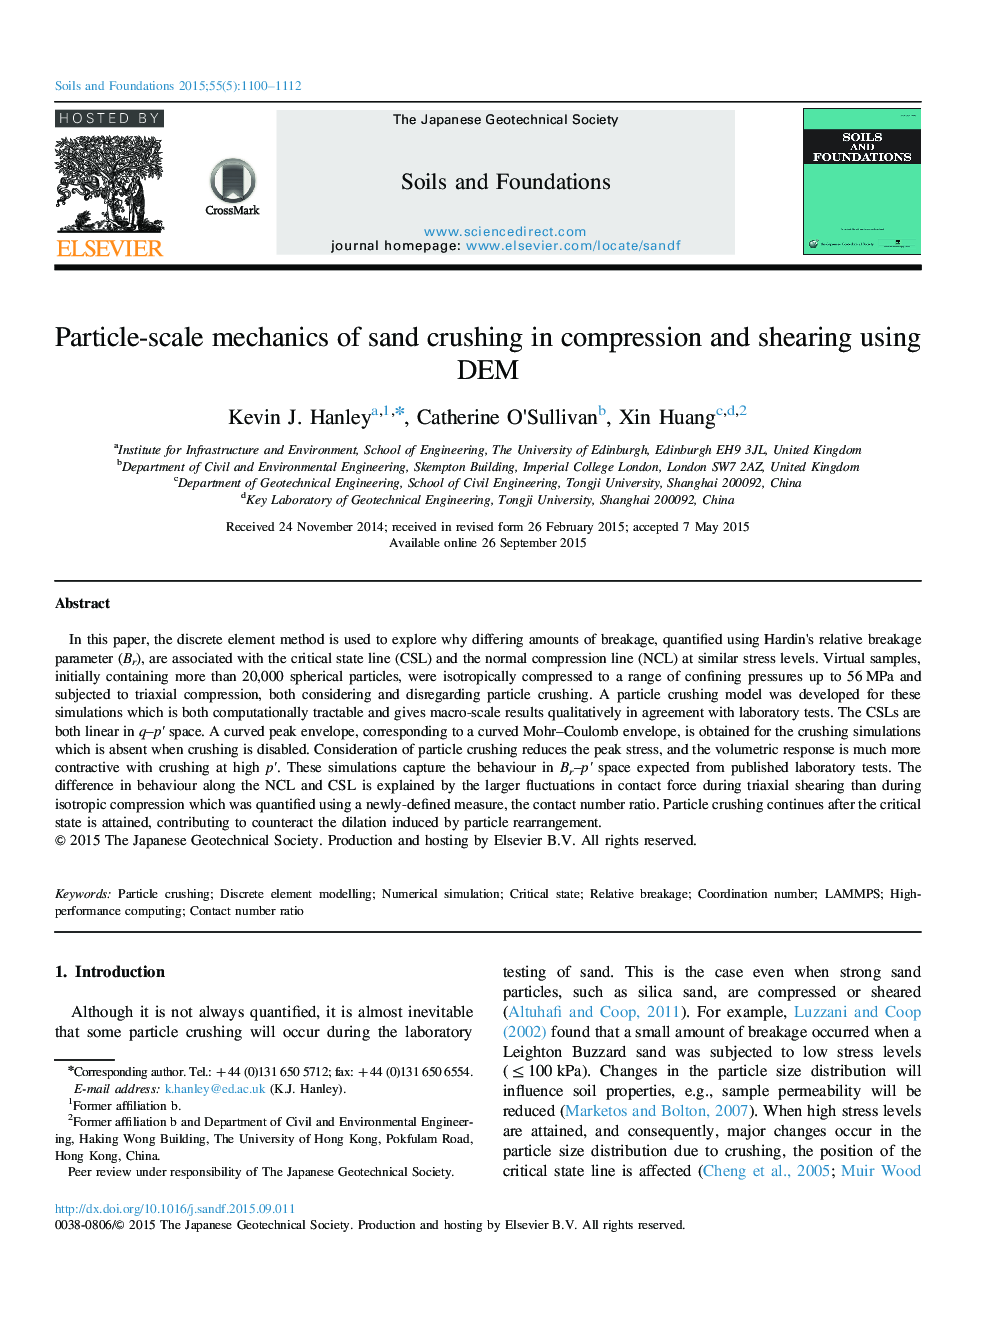 Particle-scale mechanics of sand crushing in compression and shearing using DEM